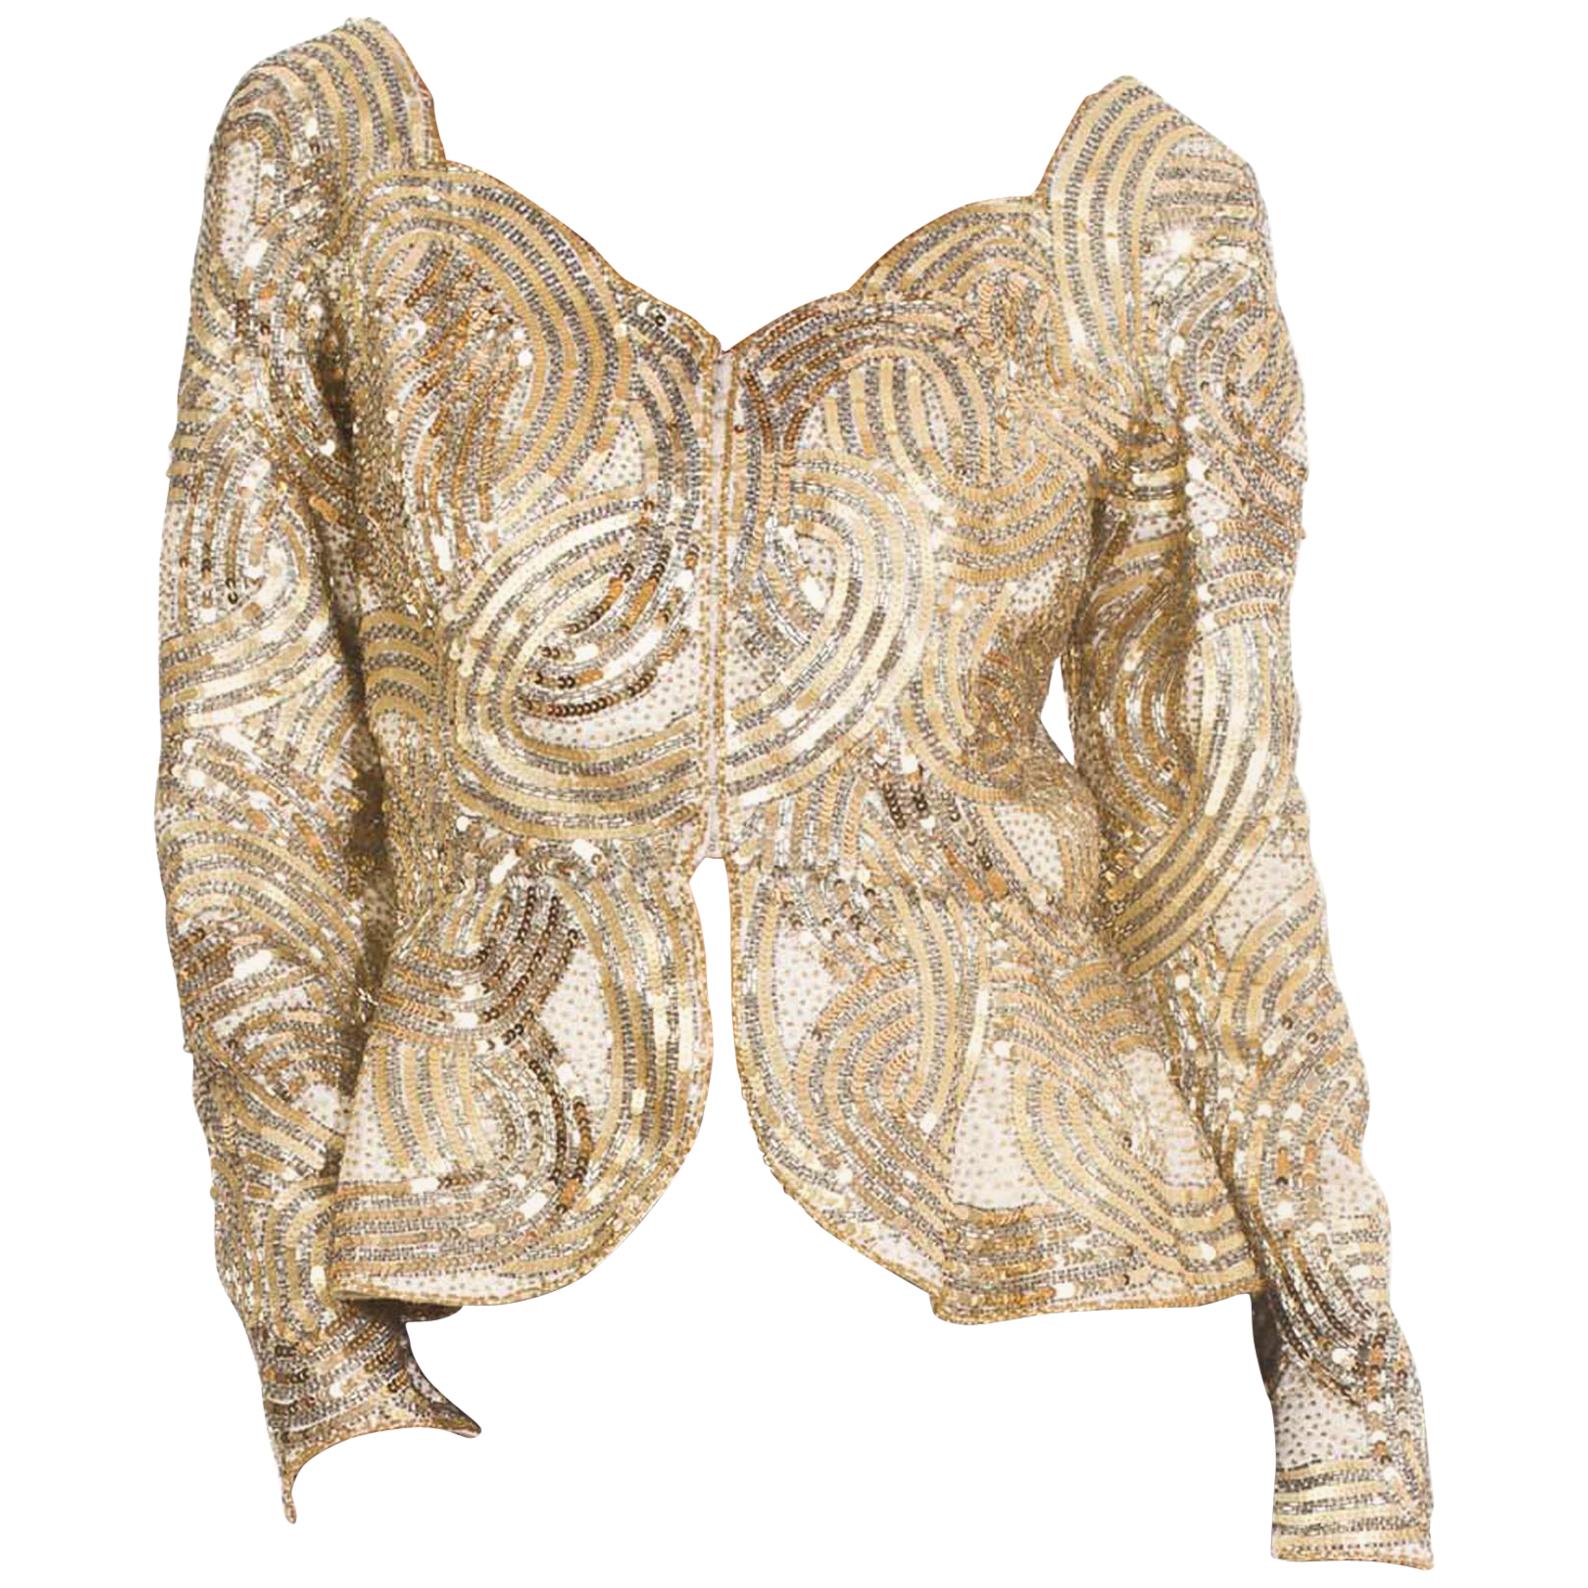 1980S Silver & Gold Beaded  "Dynasty" Style Long Sleeve Jacket Top With Peplum